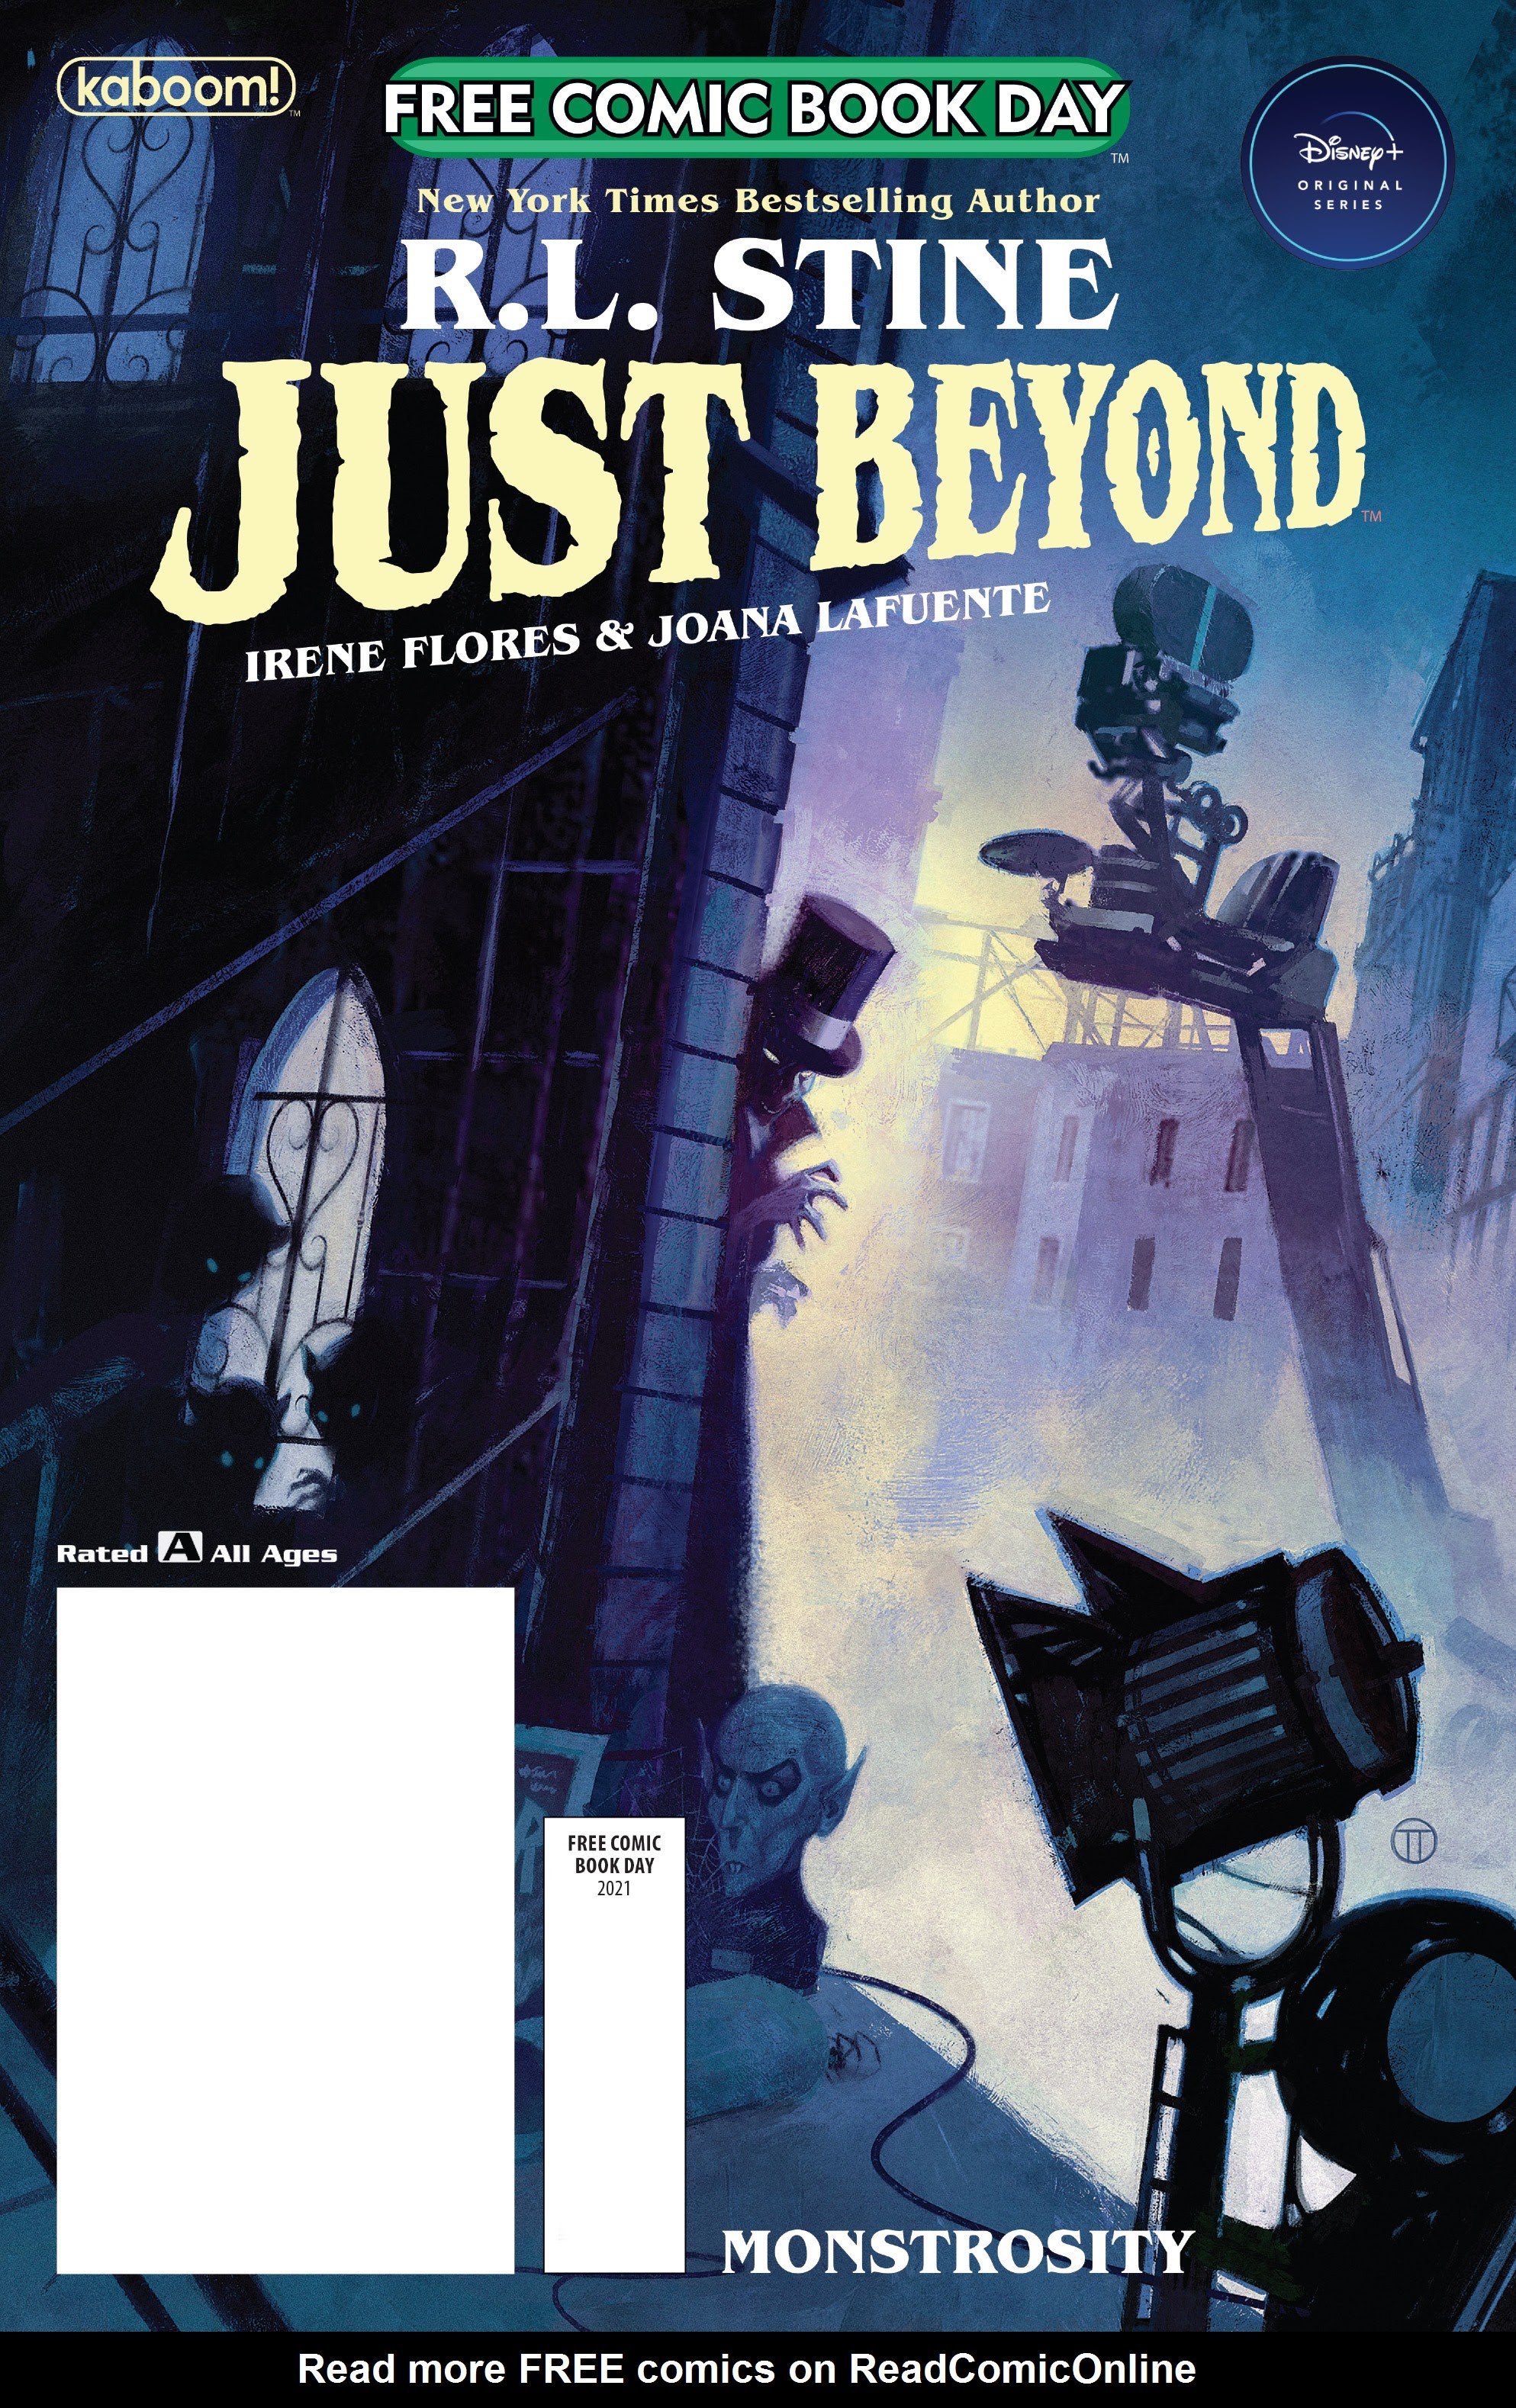 Read online Free Comic Book Day 2021 comic -  Issue # Just Beyond - Monstrosity - 1